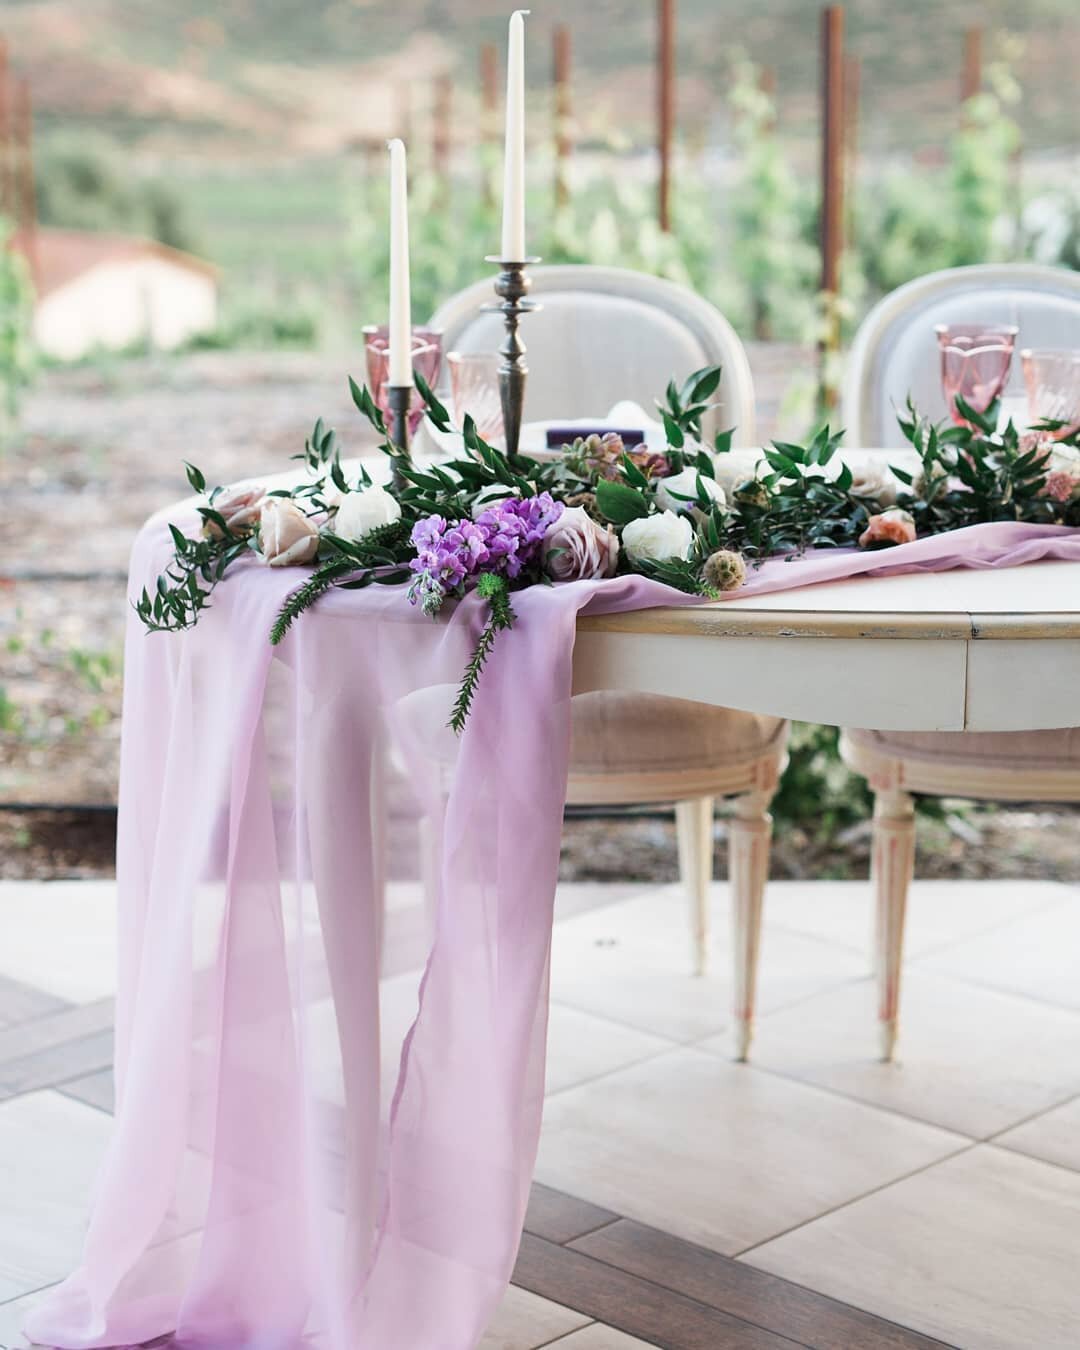 Sweetheart tables should be just as beautiful as your guest tables! After all, aren't you both the whole reason for this party in the first place?! This one is an oldie but a goodie. I think simple and elegant are always in style. 

And I can't wait 